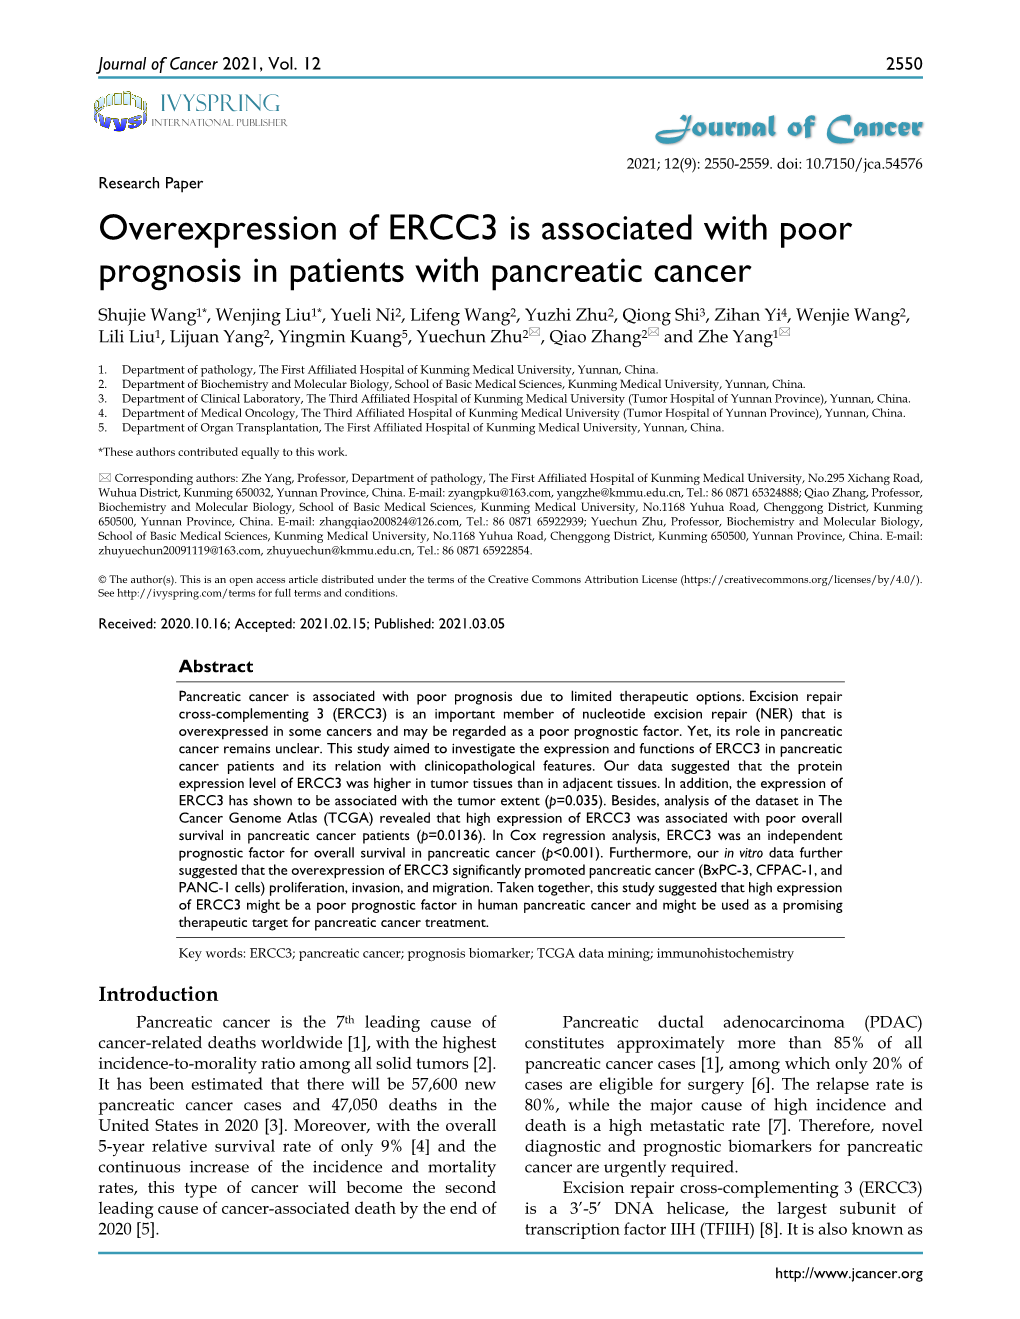 Overexpression of ERCC3 Is Associated with Poor Prognosis In